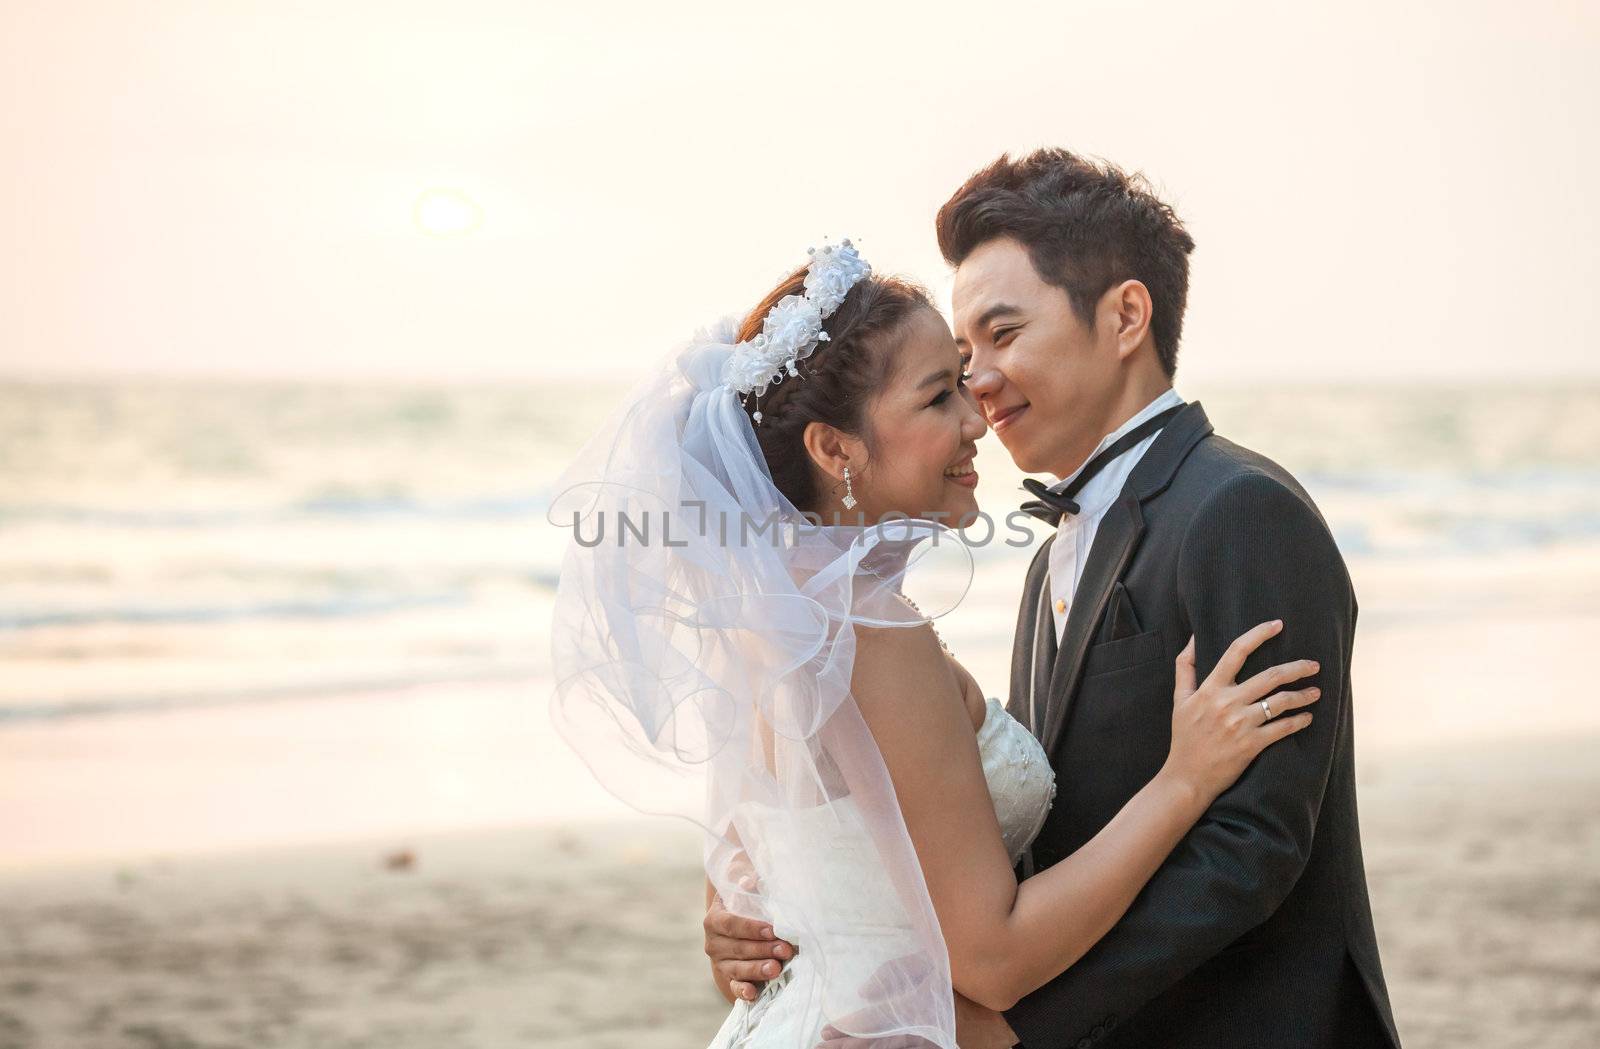 happiness and romantic Scene of love couples partners wedding on the Beach